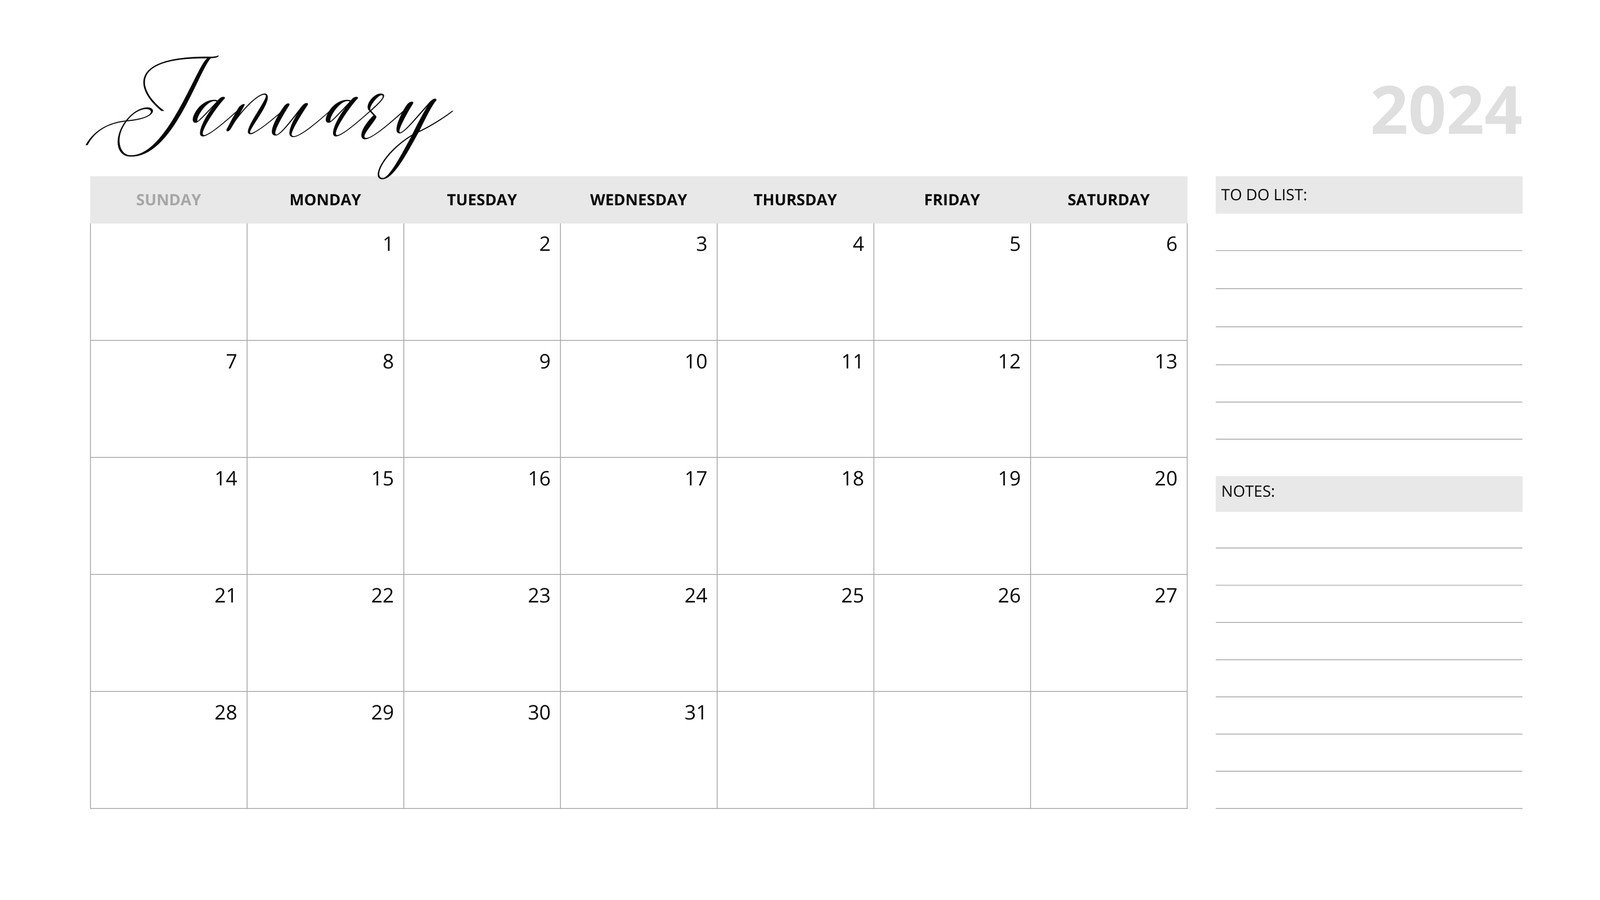 Free, Printable, Customizable Monthly Calendar Templates | Canva with regard to Free Printable Calendar 2024 Monthly Blank